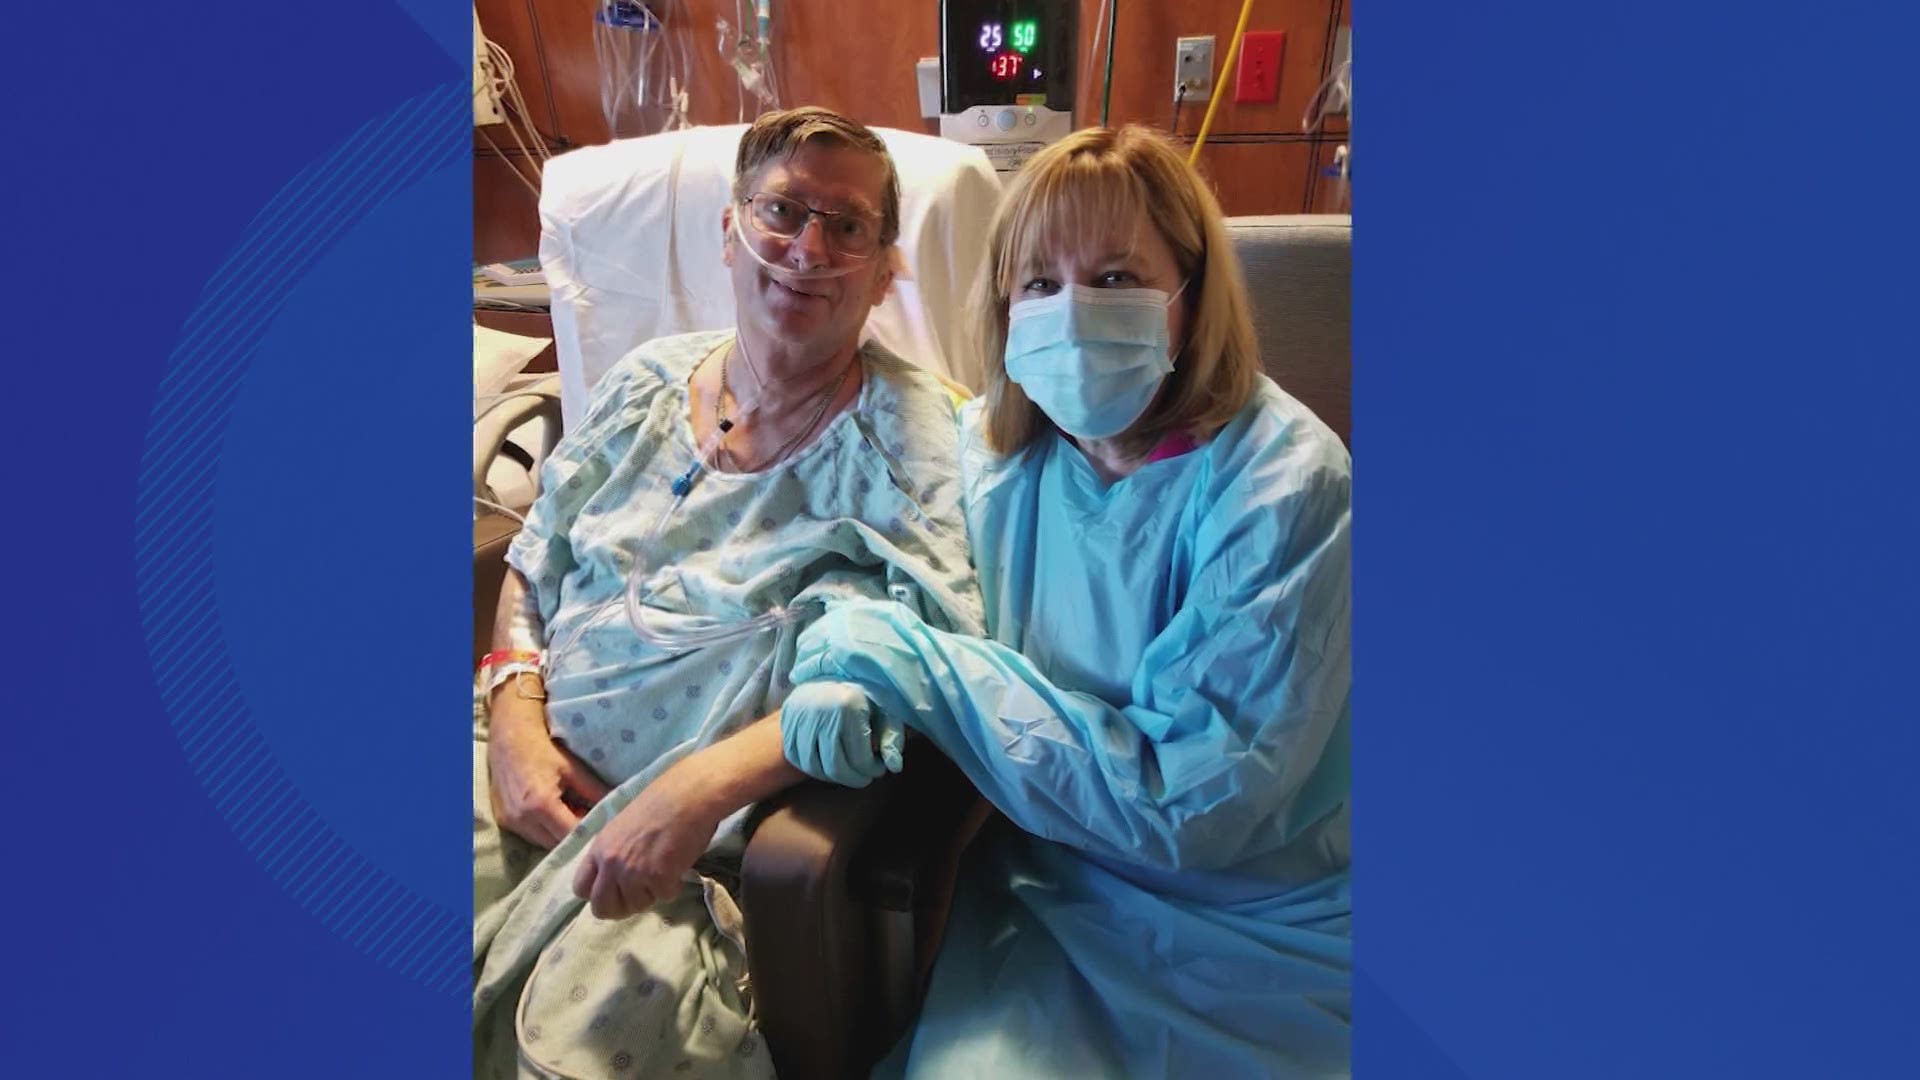 The 64-year-old had no pre-existing health conditions. Surviving the virus destroyed his lungs, making him a candidate for a double lung transplant.